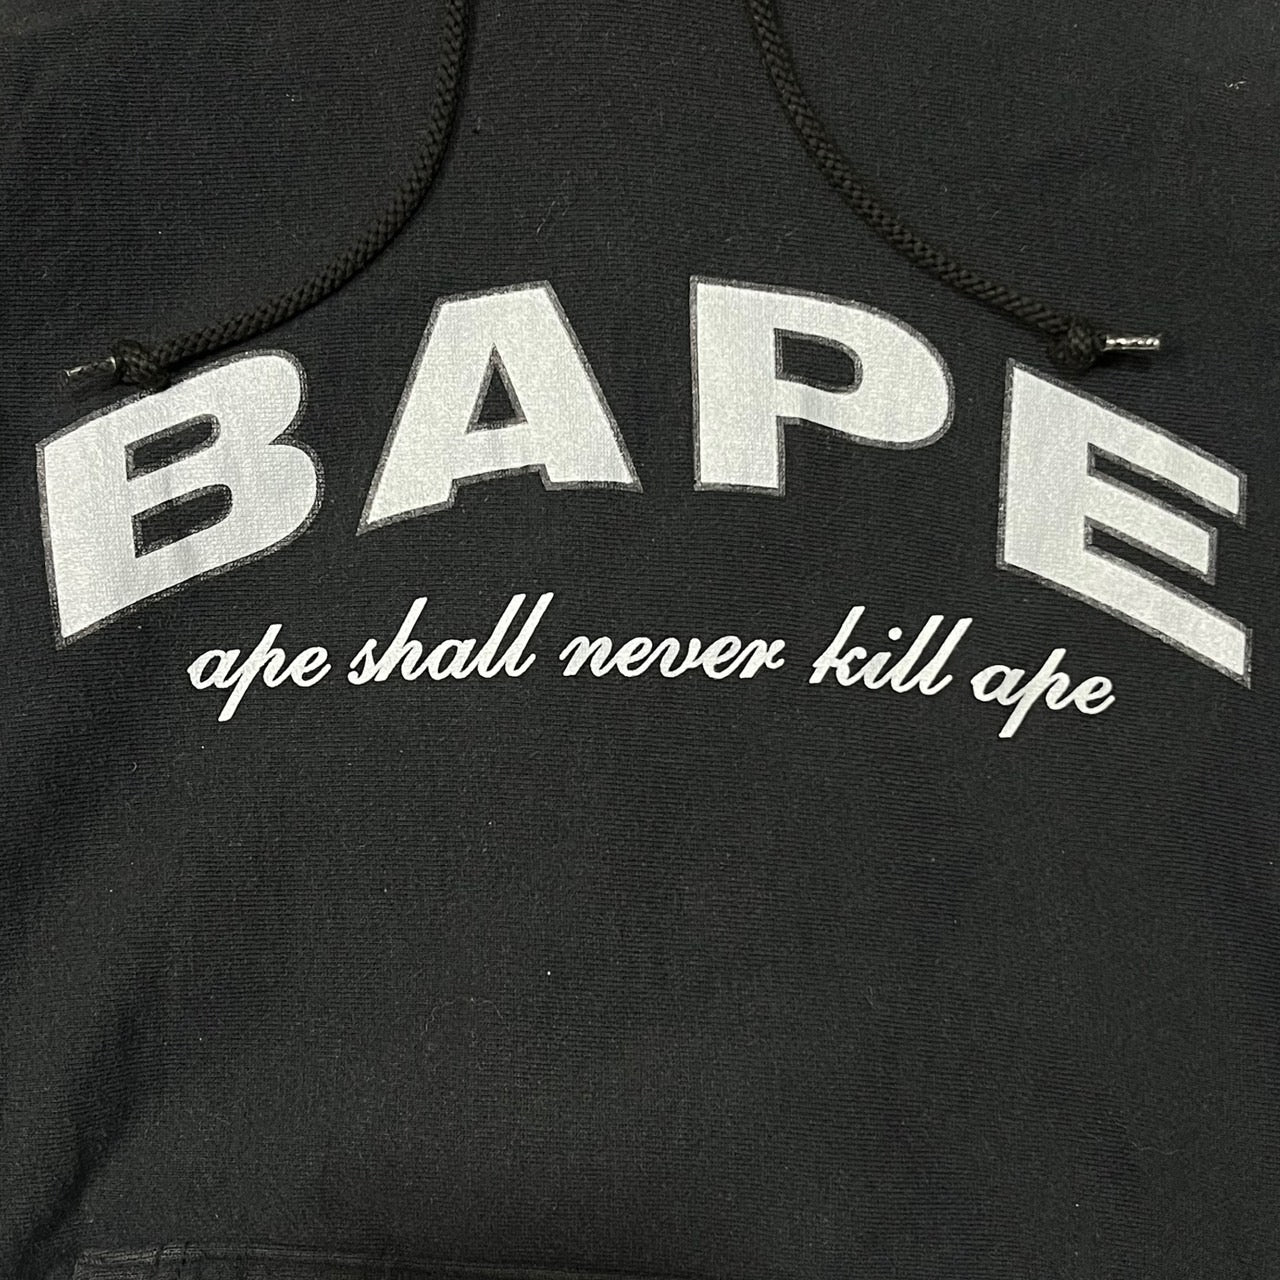 A BATHING APE(アベイシングエイプ) 00's ”MADE BY GENERAL ”ロゴ プリント パーカー S ブラック 初期タグ ape shall never kill ape